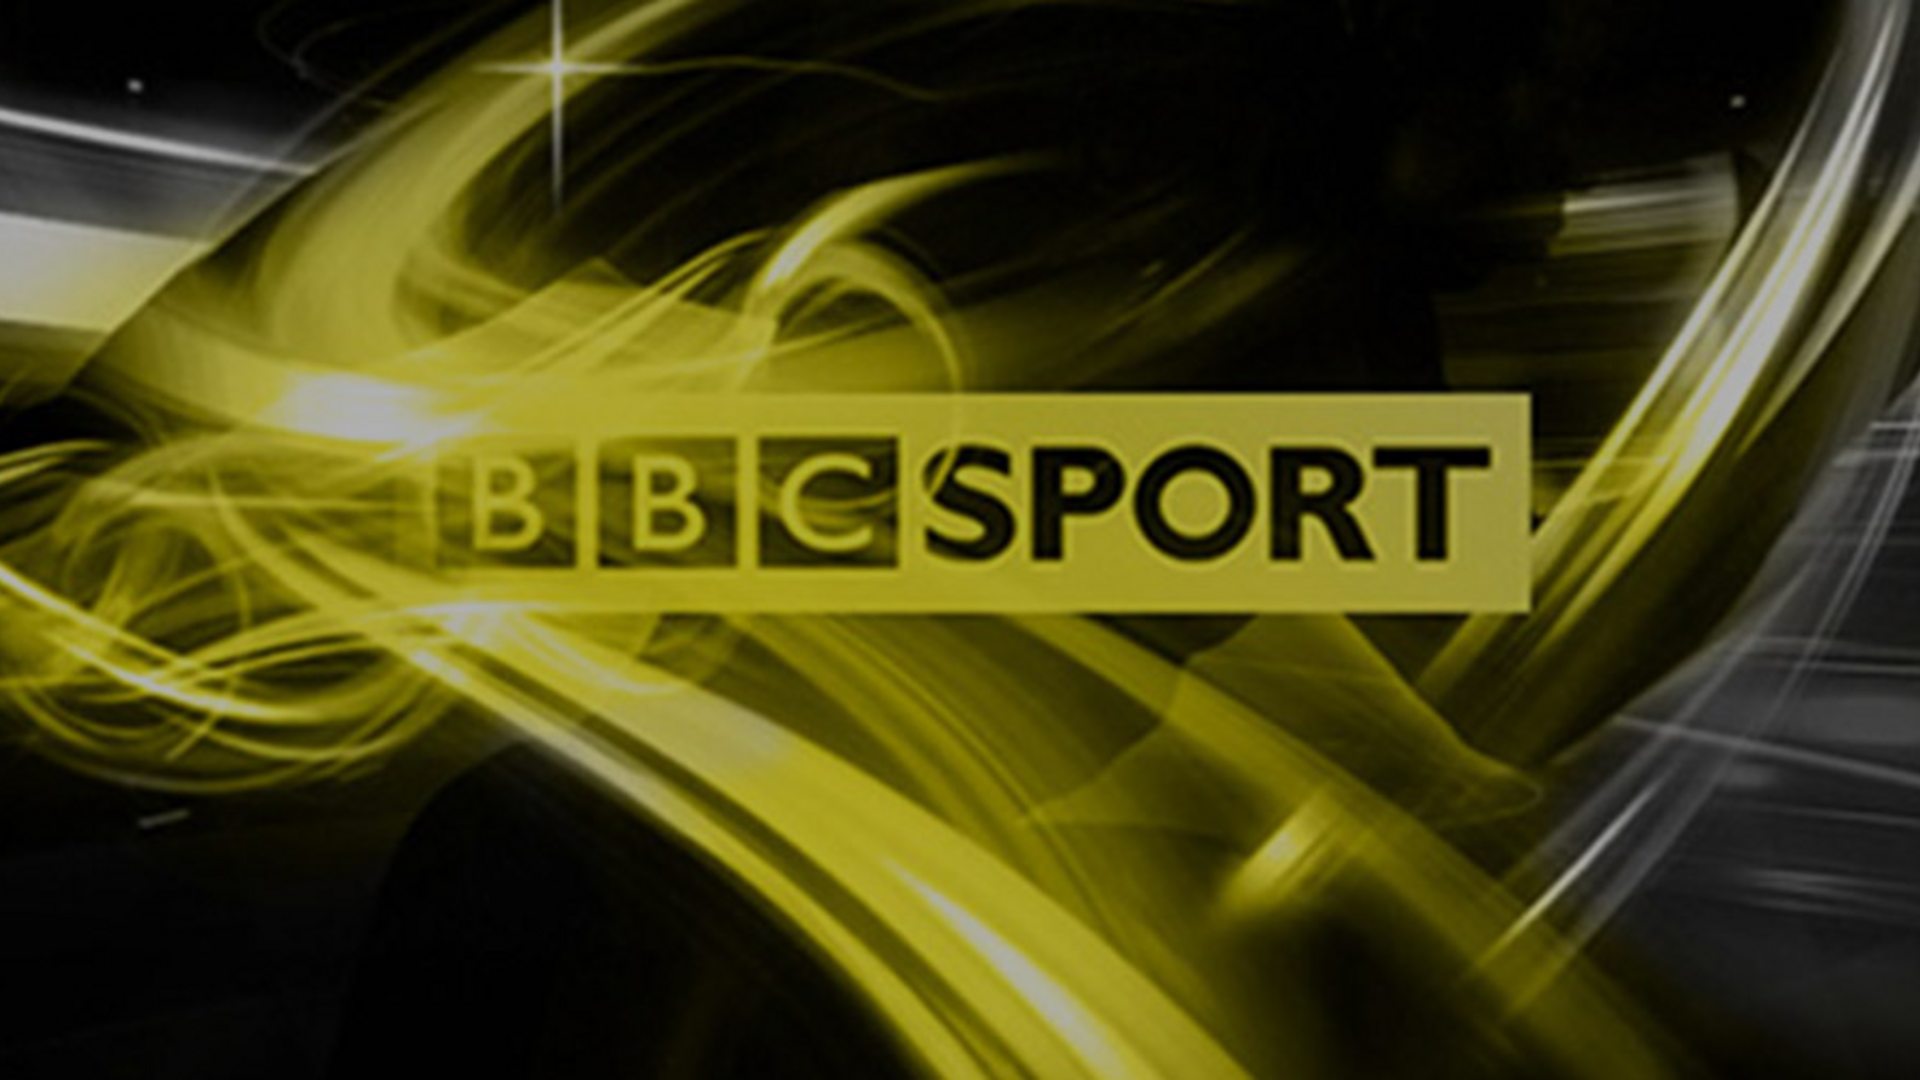 Uksport Is 20 History Of The Bbc